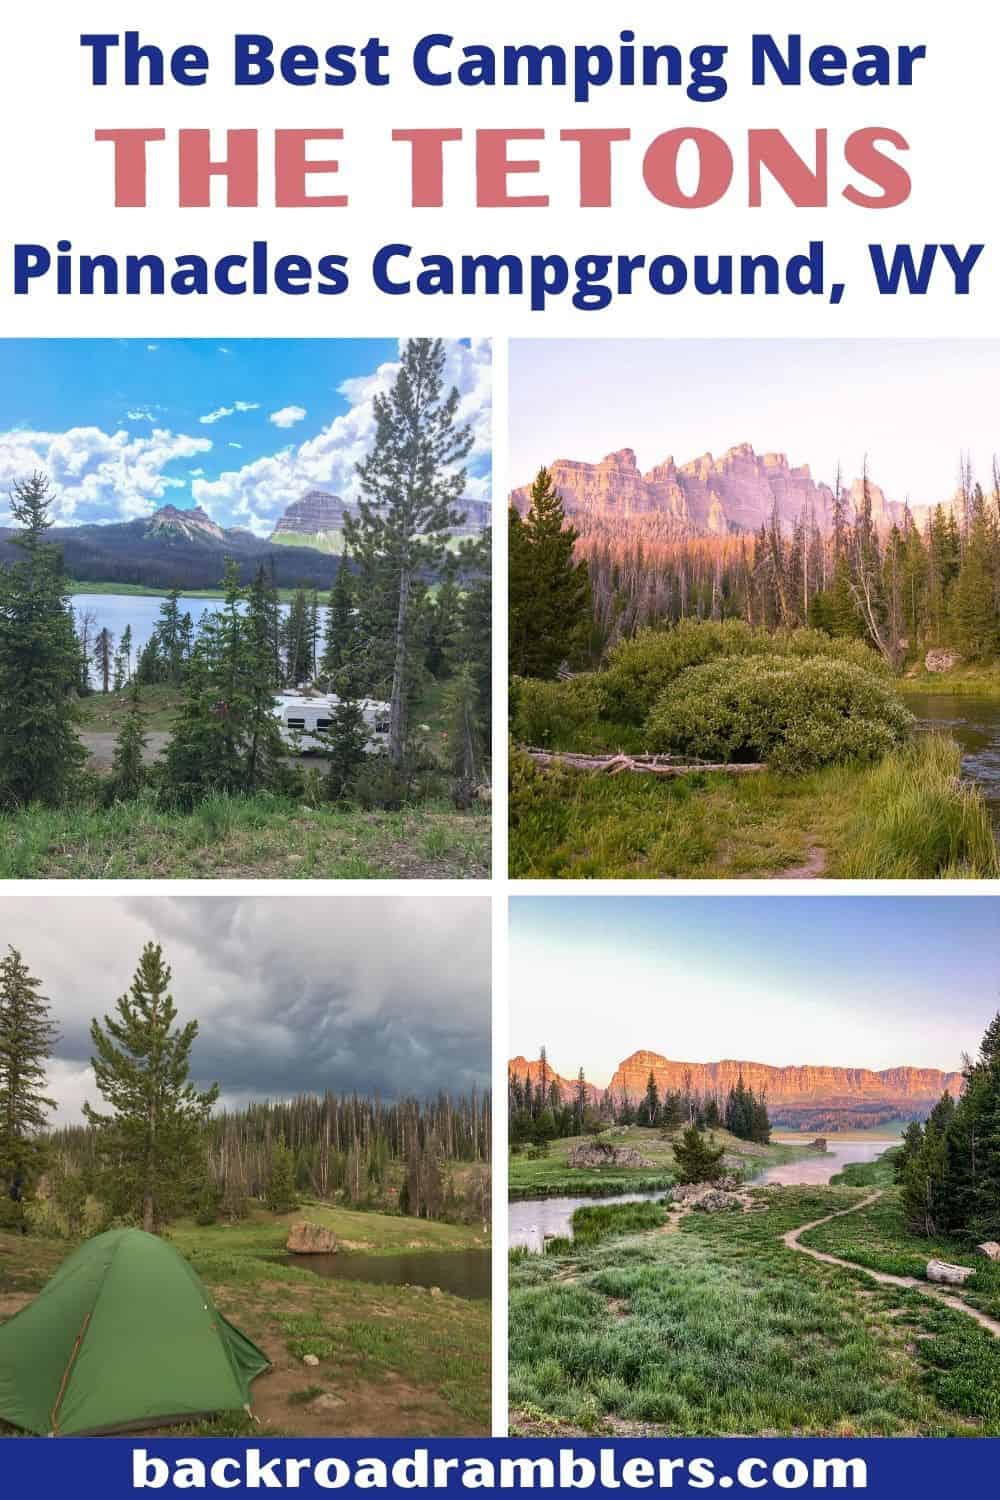 A collection of photos from Pinnacles Campground in Wyoming. Text overlay: The Best Camping Near the Tetons - Pinnacles Campground WY.